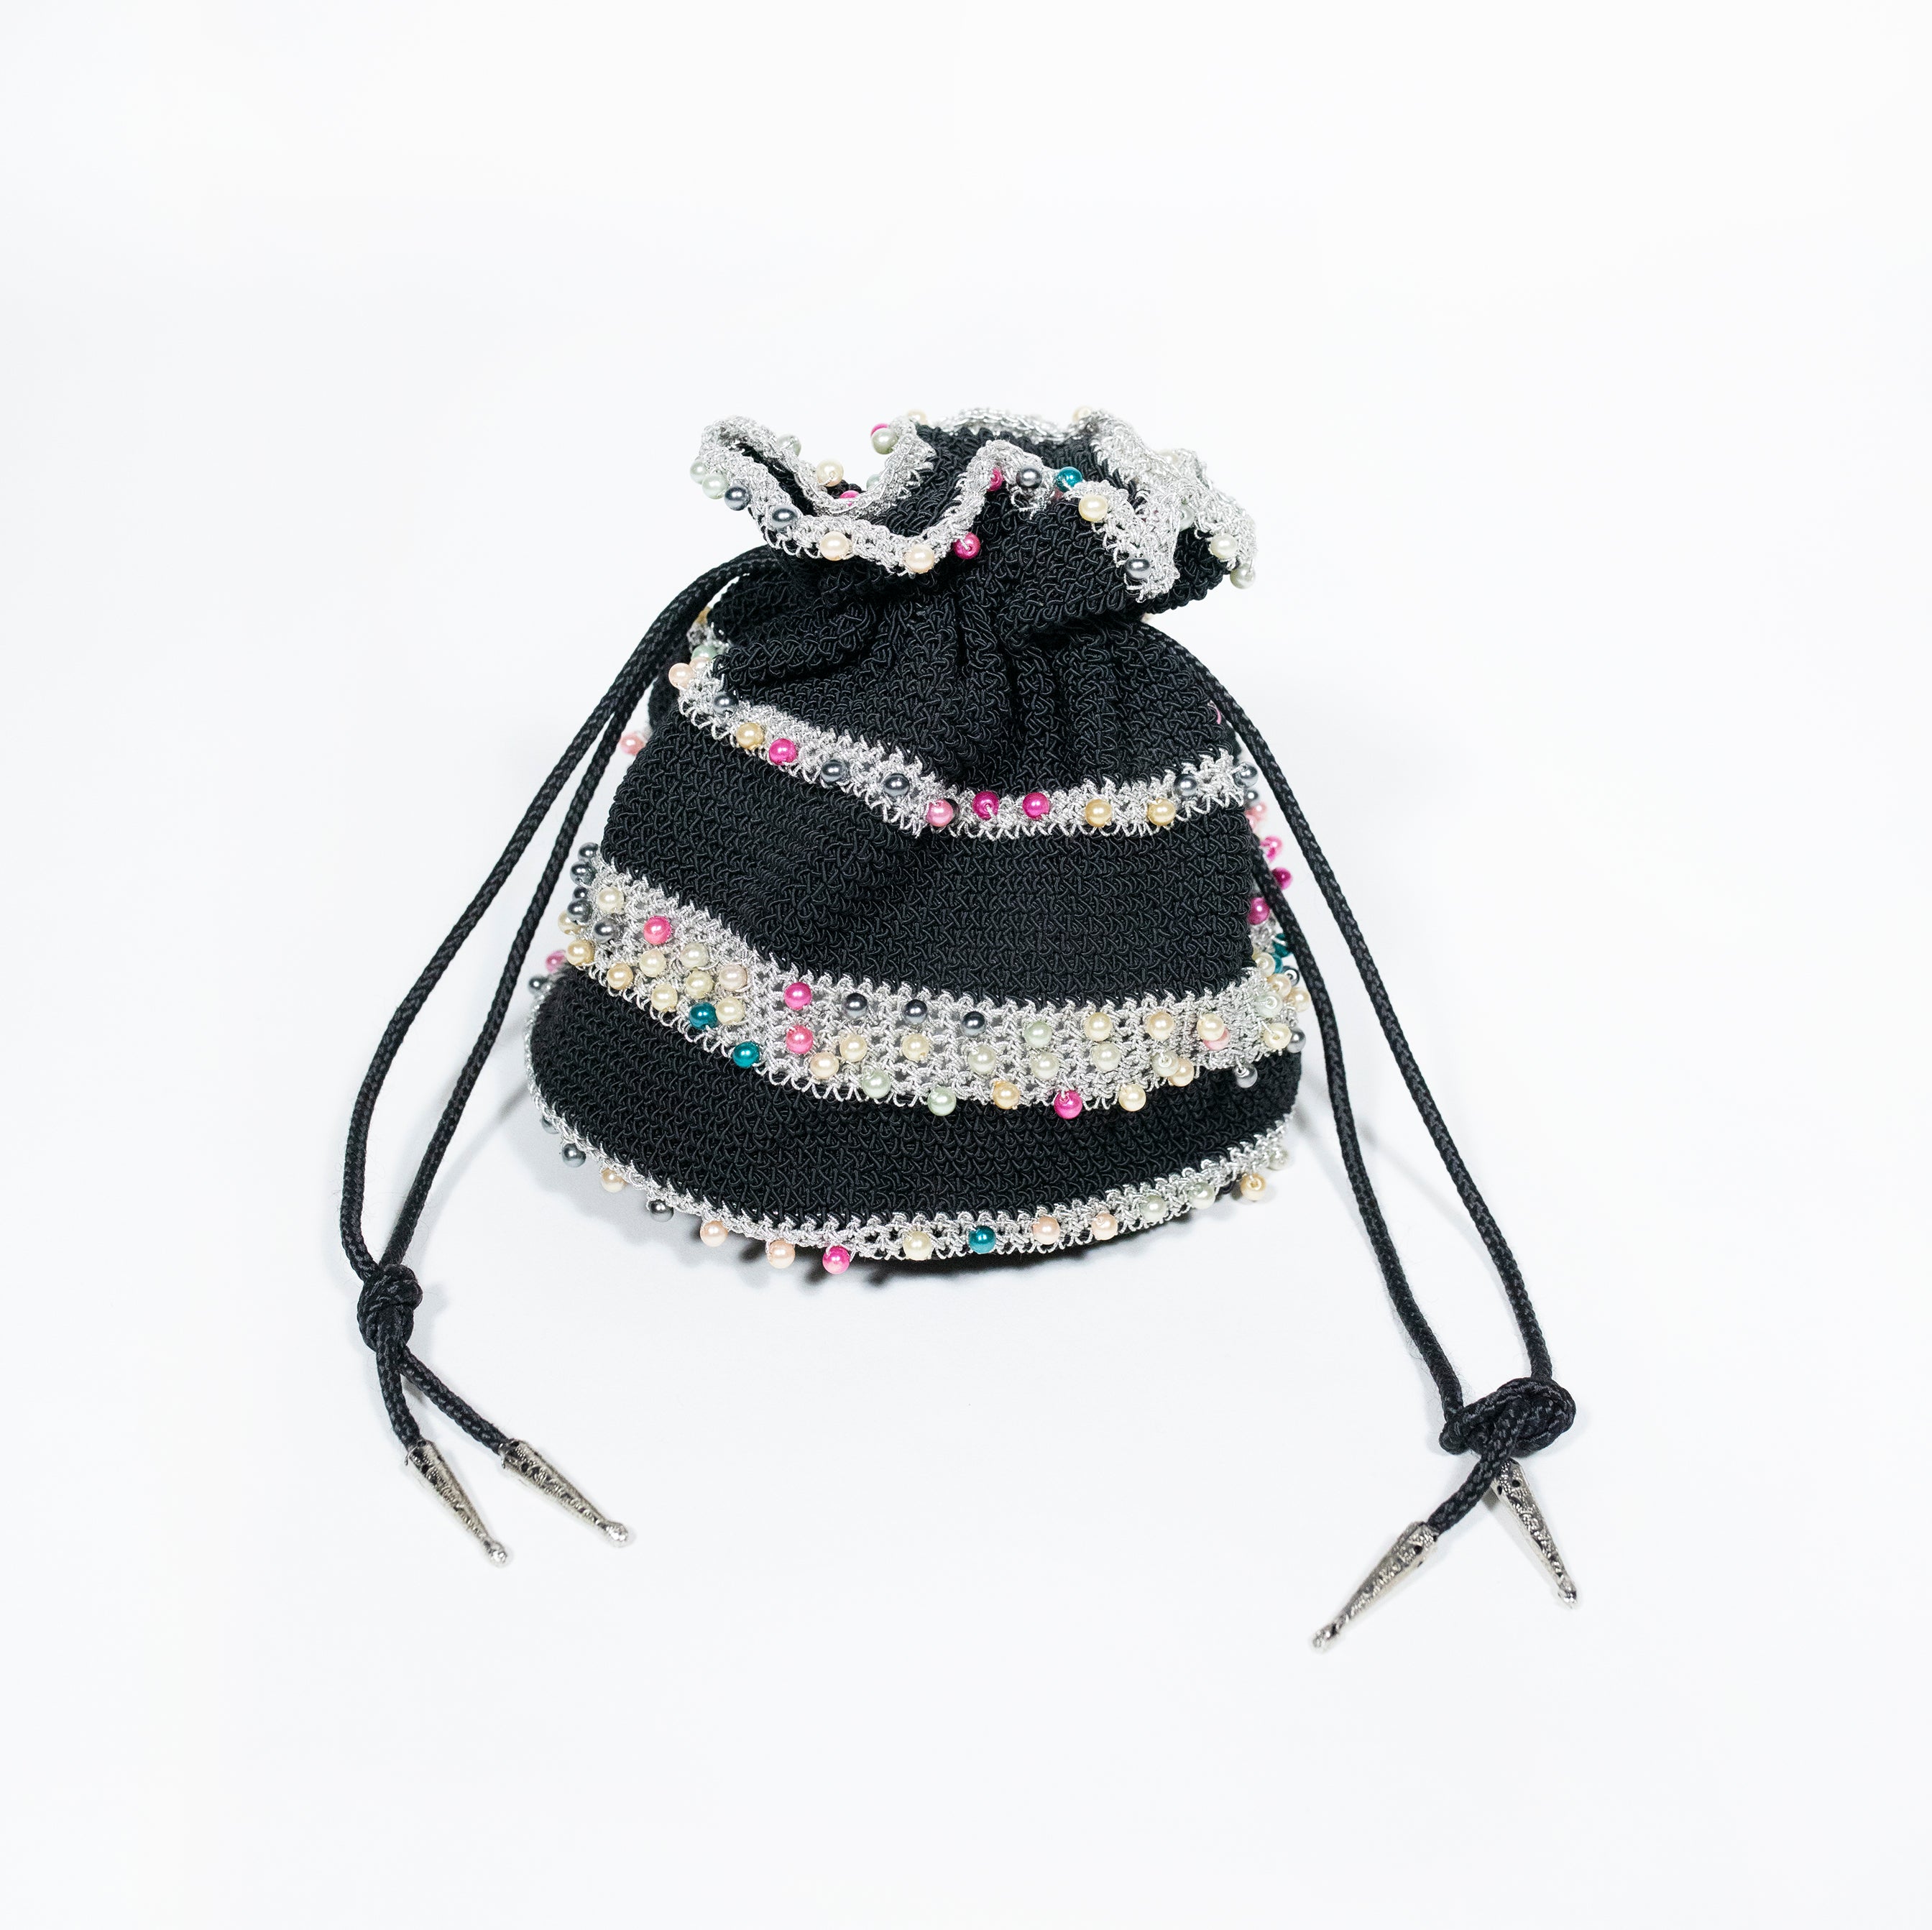 Vintage Crochet and Beaded Bag